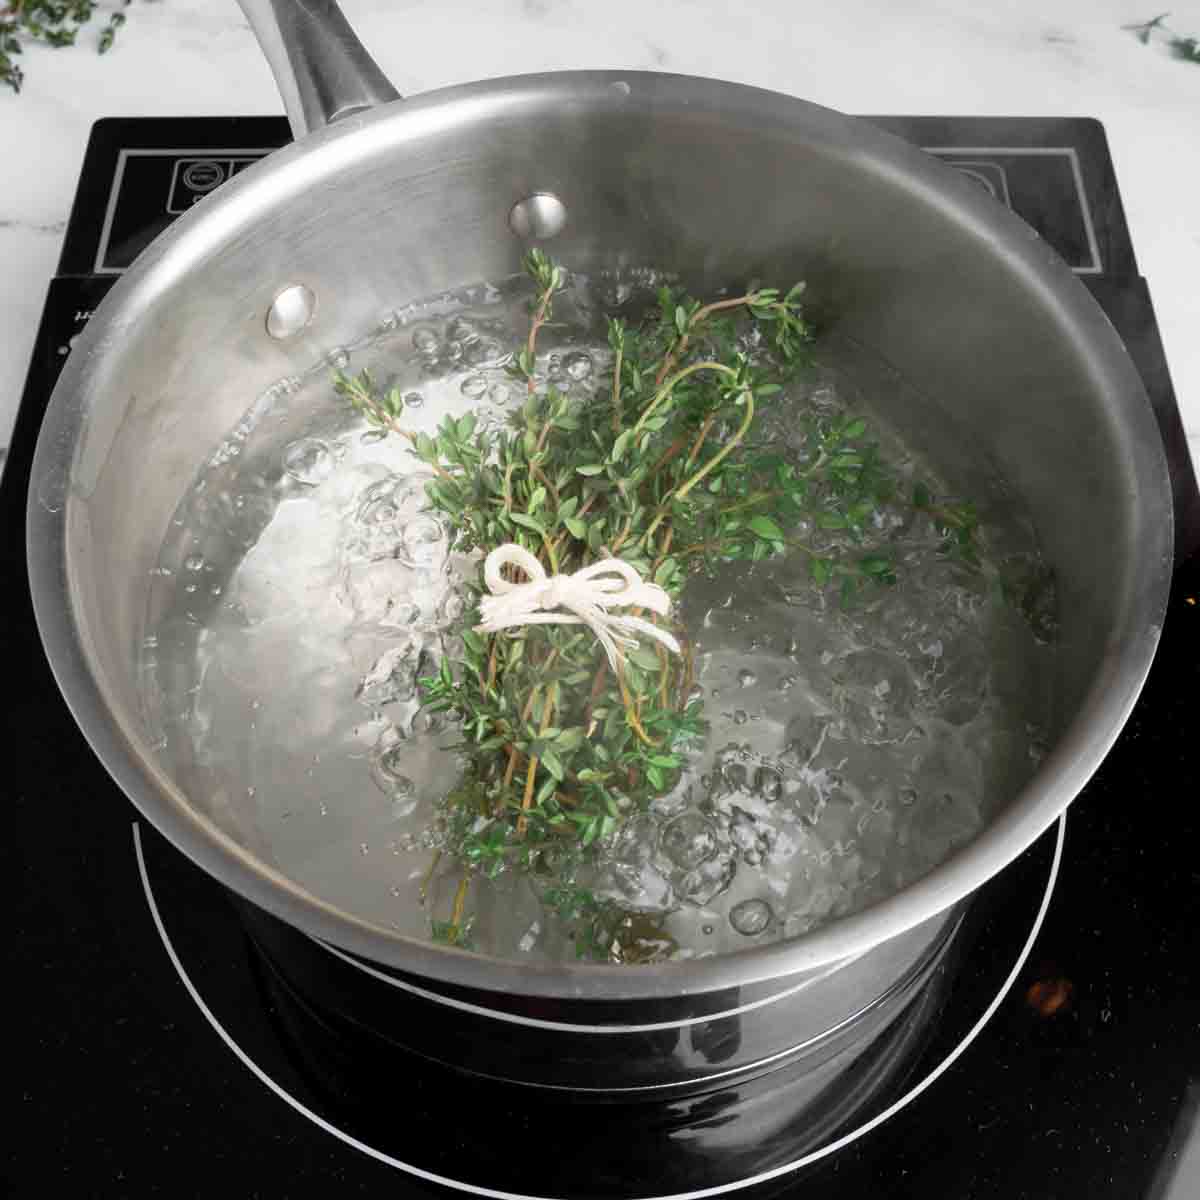 A bundle of thyme blanching in boiling water.